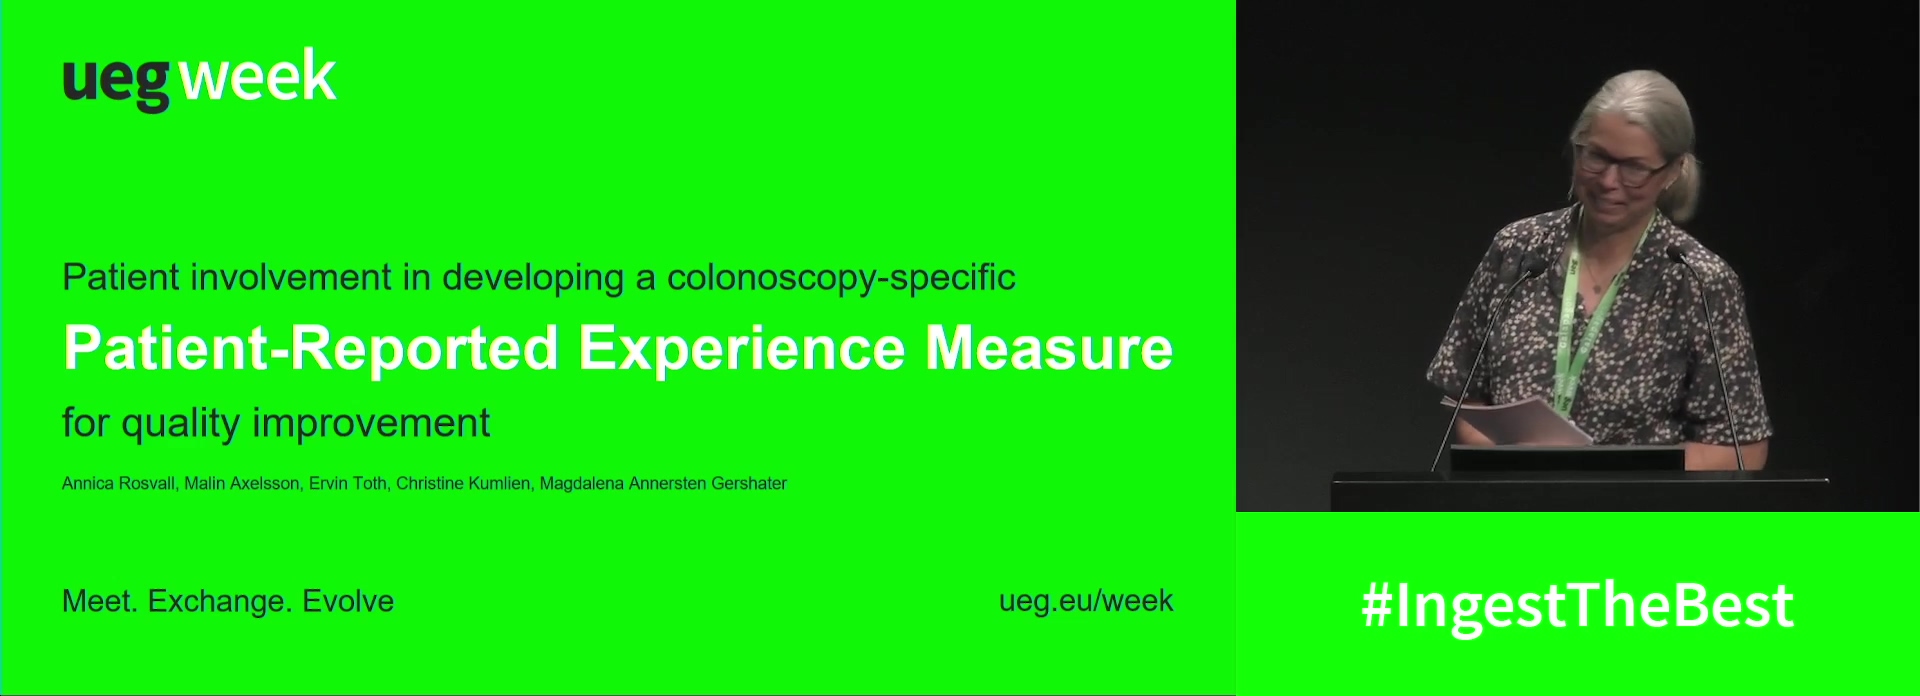 Patient involvement in developing colonoscopy-specific patient-reported experience measure for quality improvement